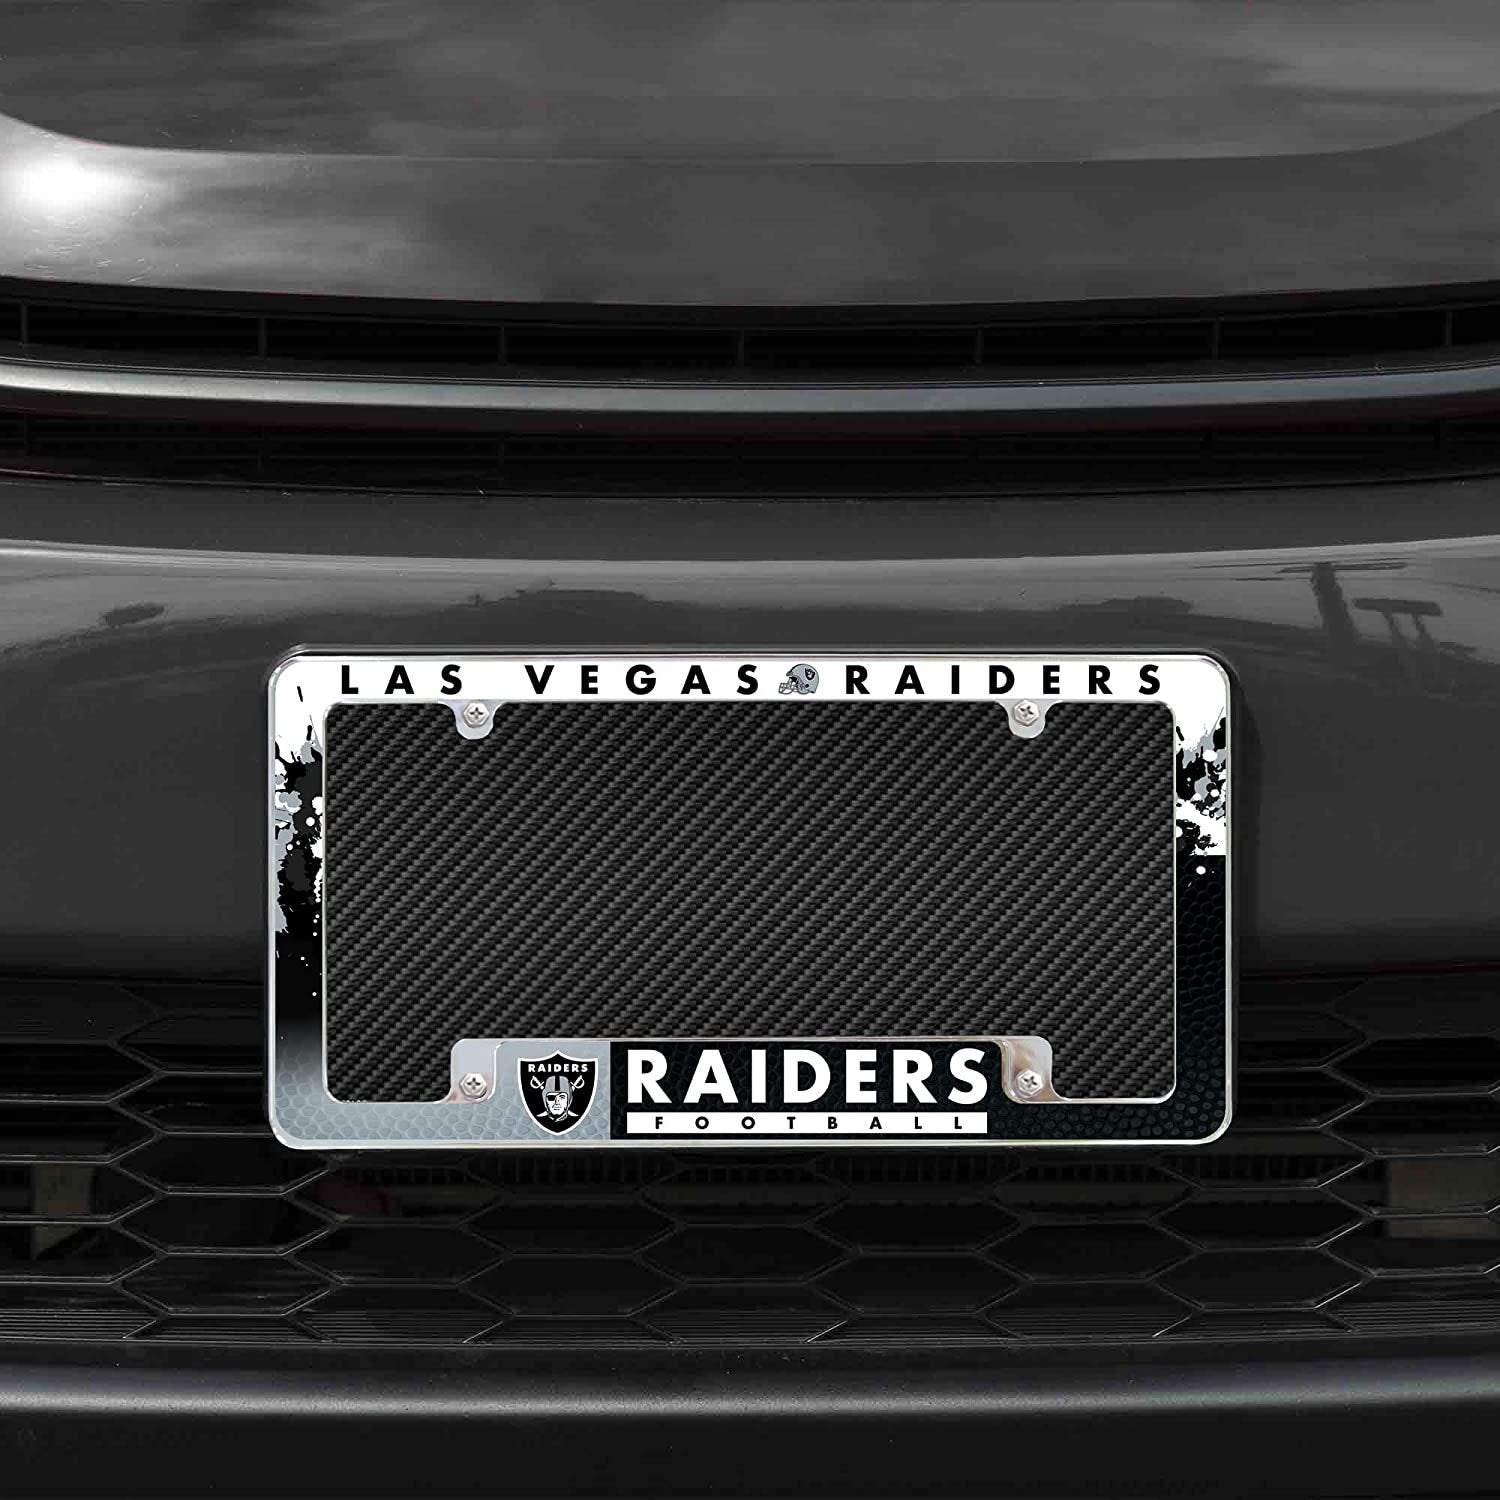 Las Vegas Raiders Metal License Plate Frame Tag Cover All Over Design 12x6 Inch